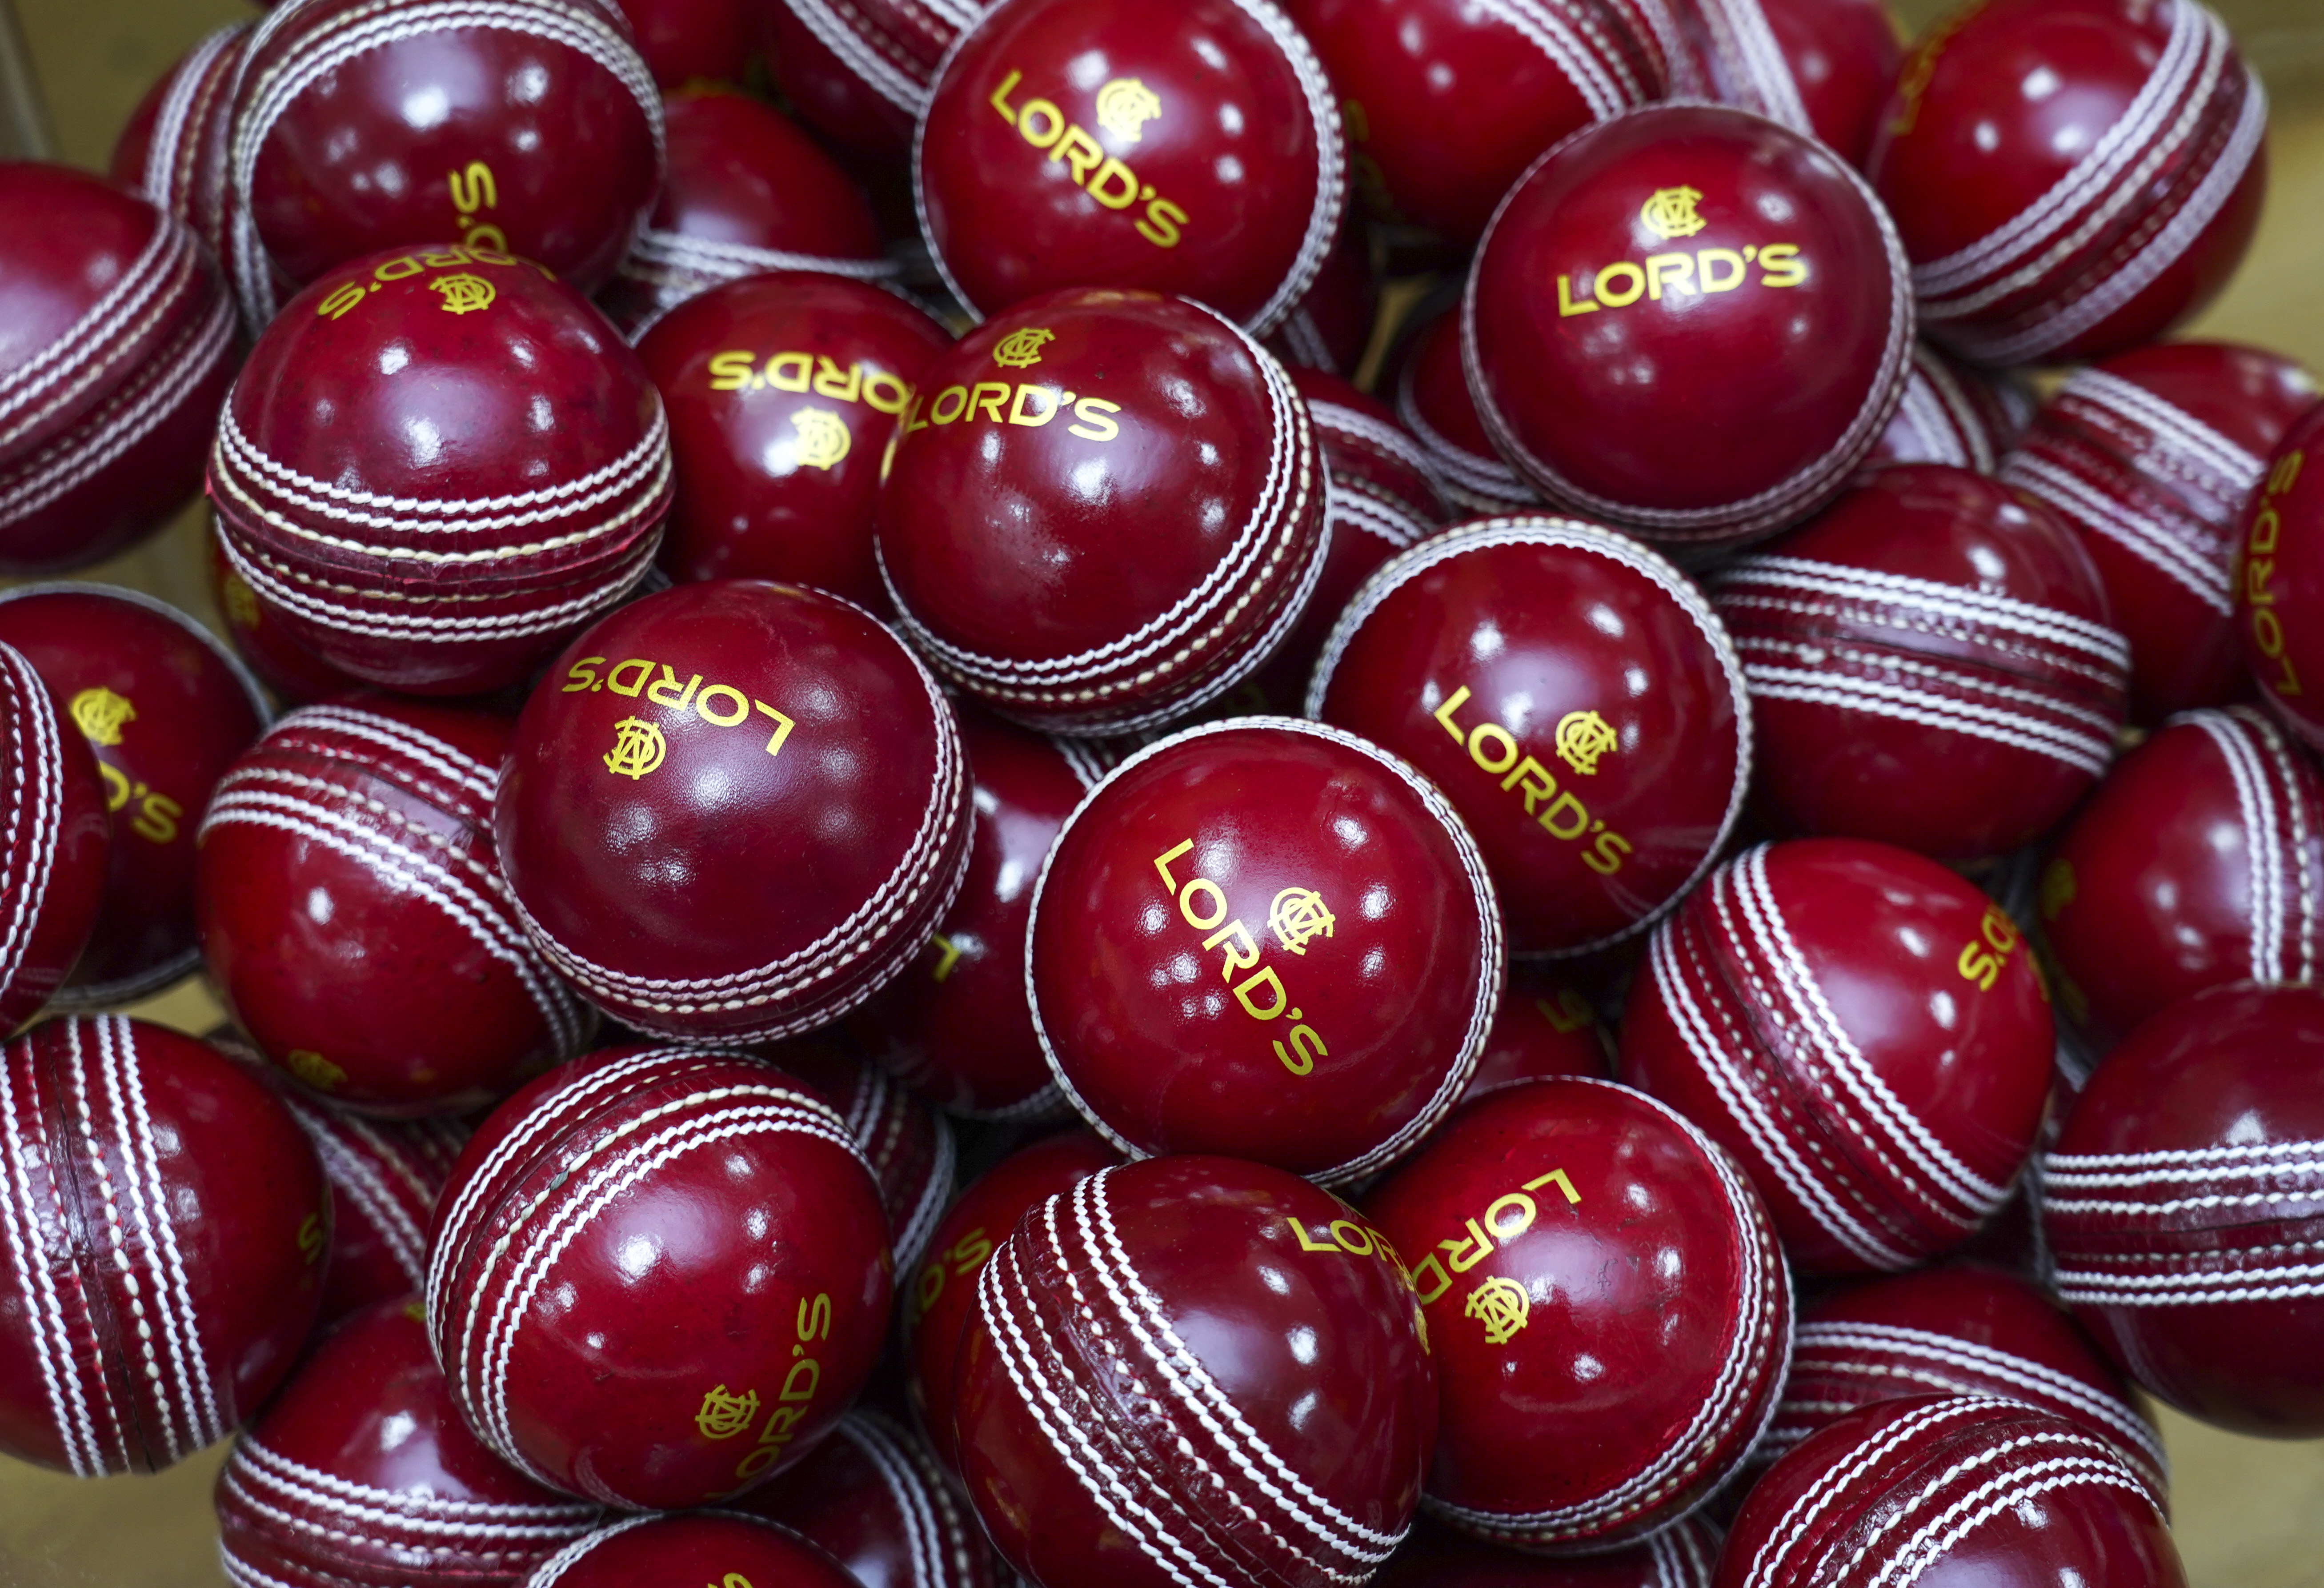 Lord's cricket ball